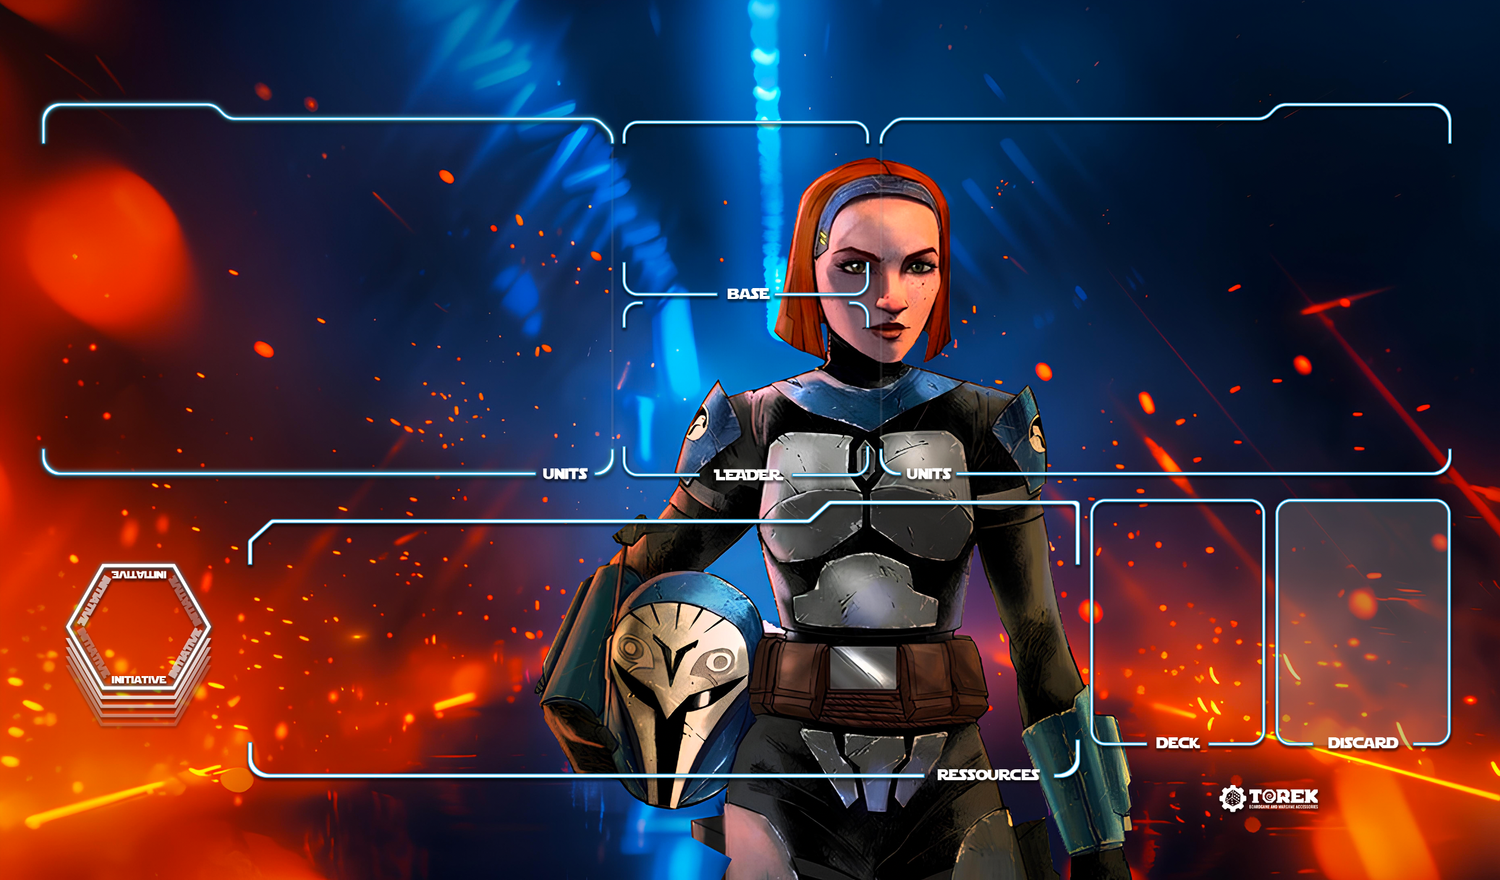 Playmat inspired by Bo-Katan Kryze / Star Wars unlimited compatible / 1 player